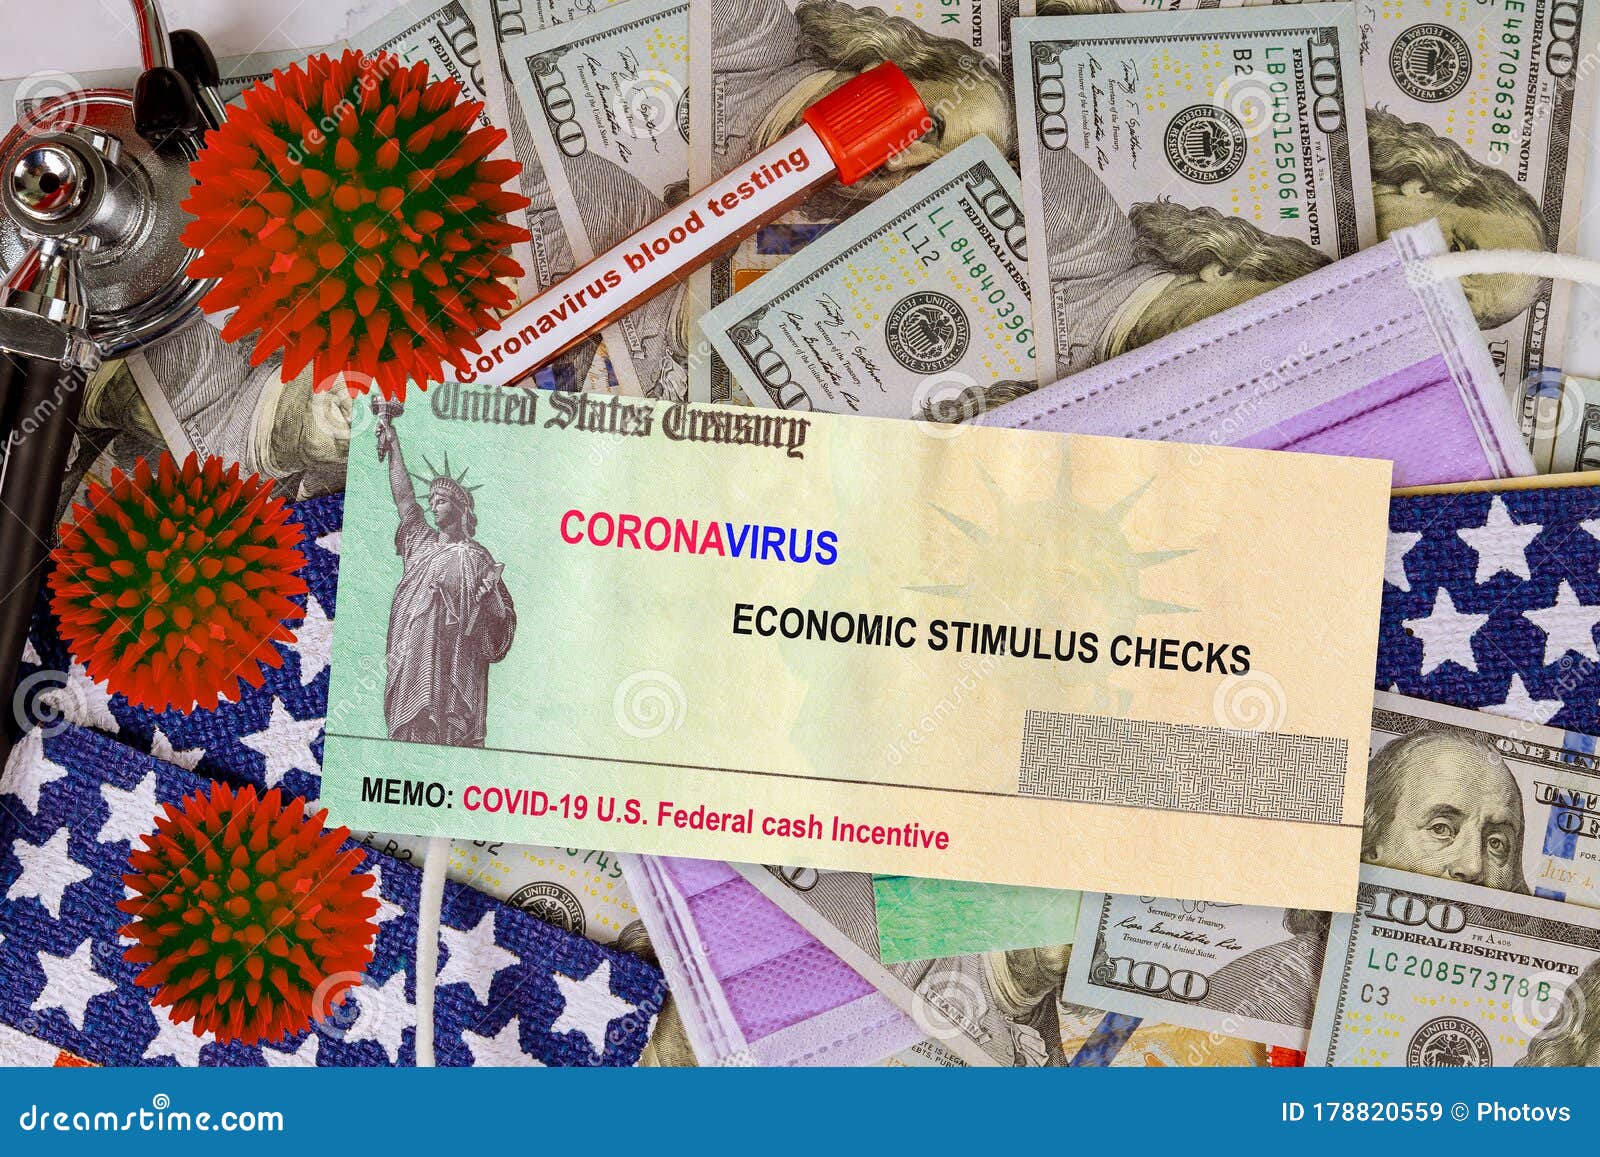 stimulus refund check bill federal government protective mask coronavirus covid 19 infected